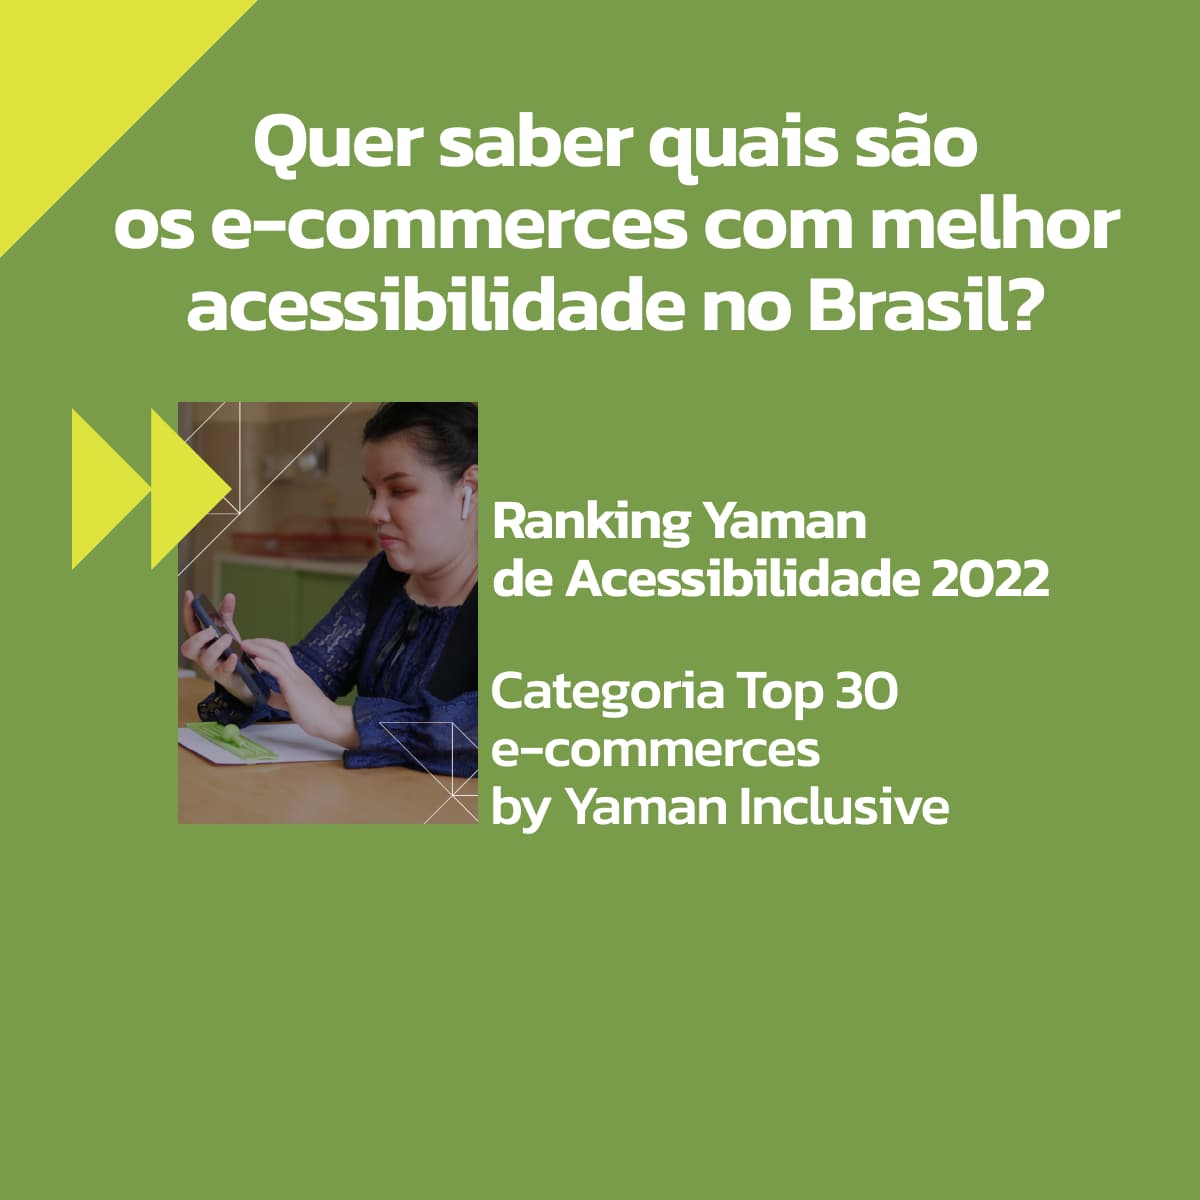 Ranking Yaman de Acessibilidade 2022 Categoria Top 30 e-commerces by Yaman Inclusive